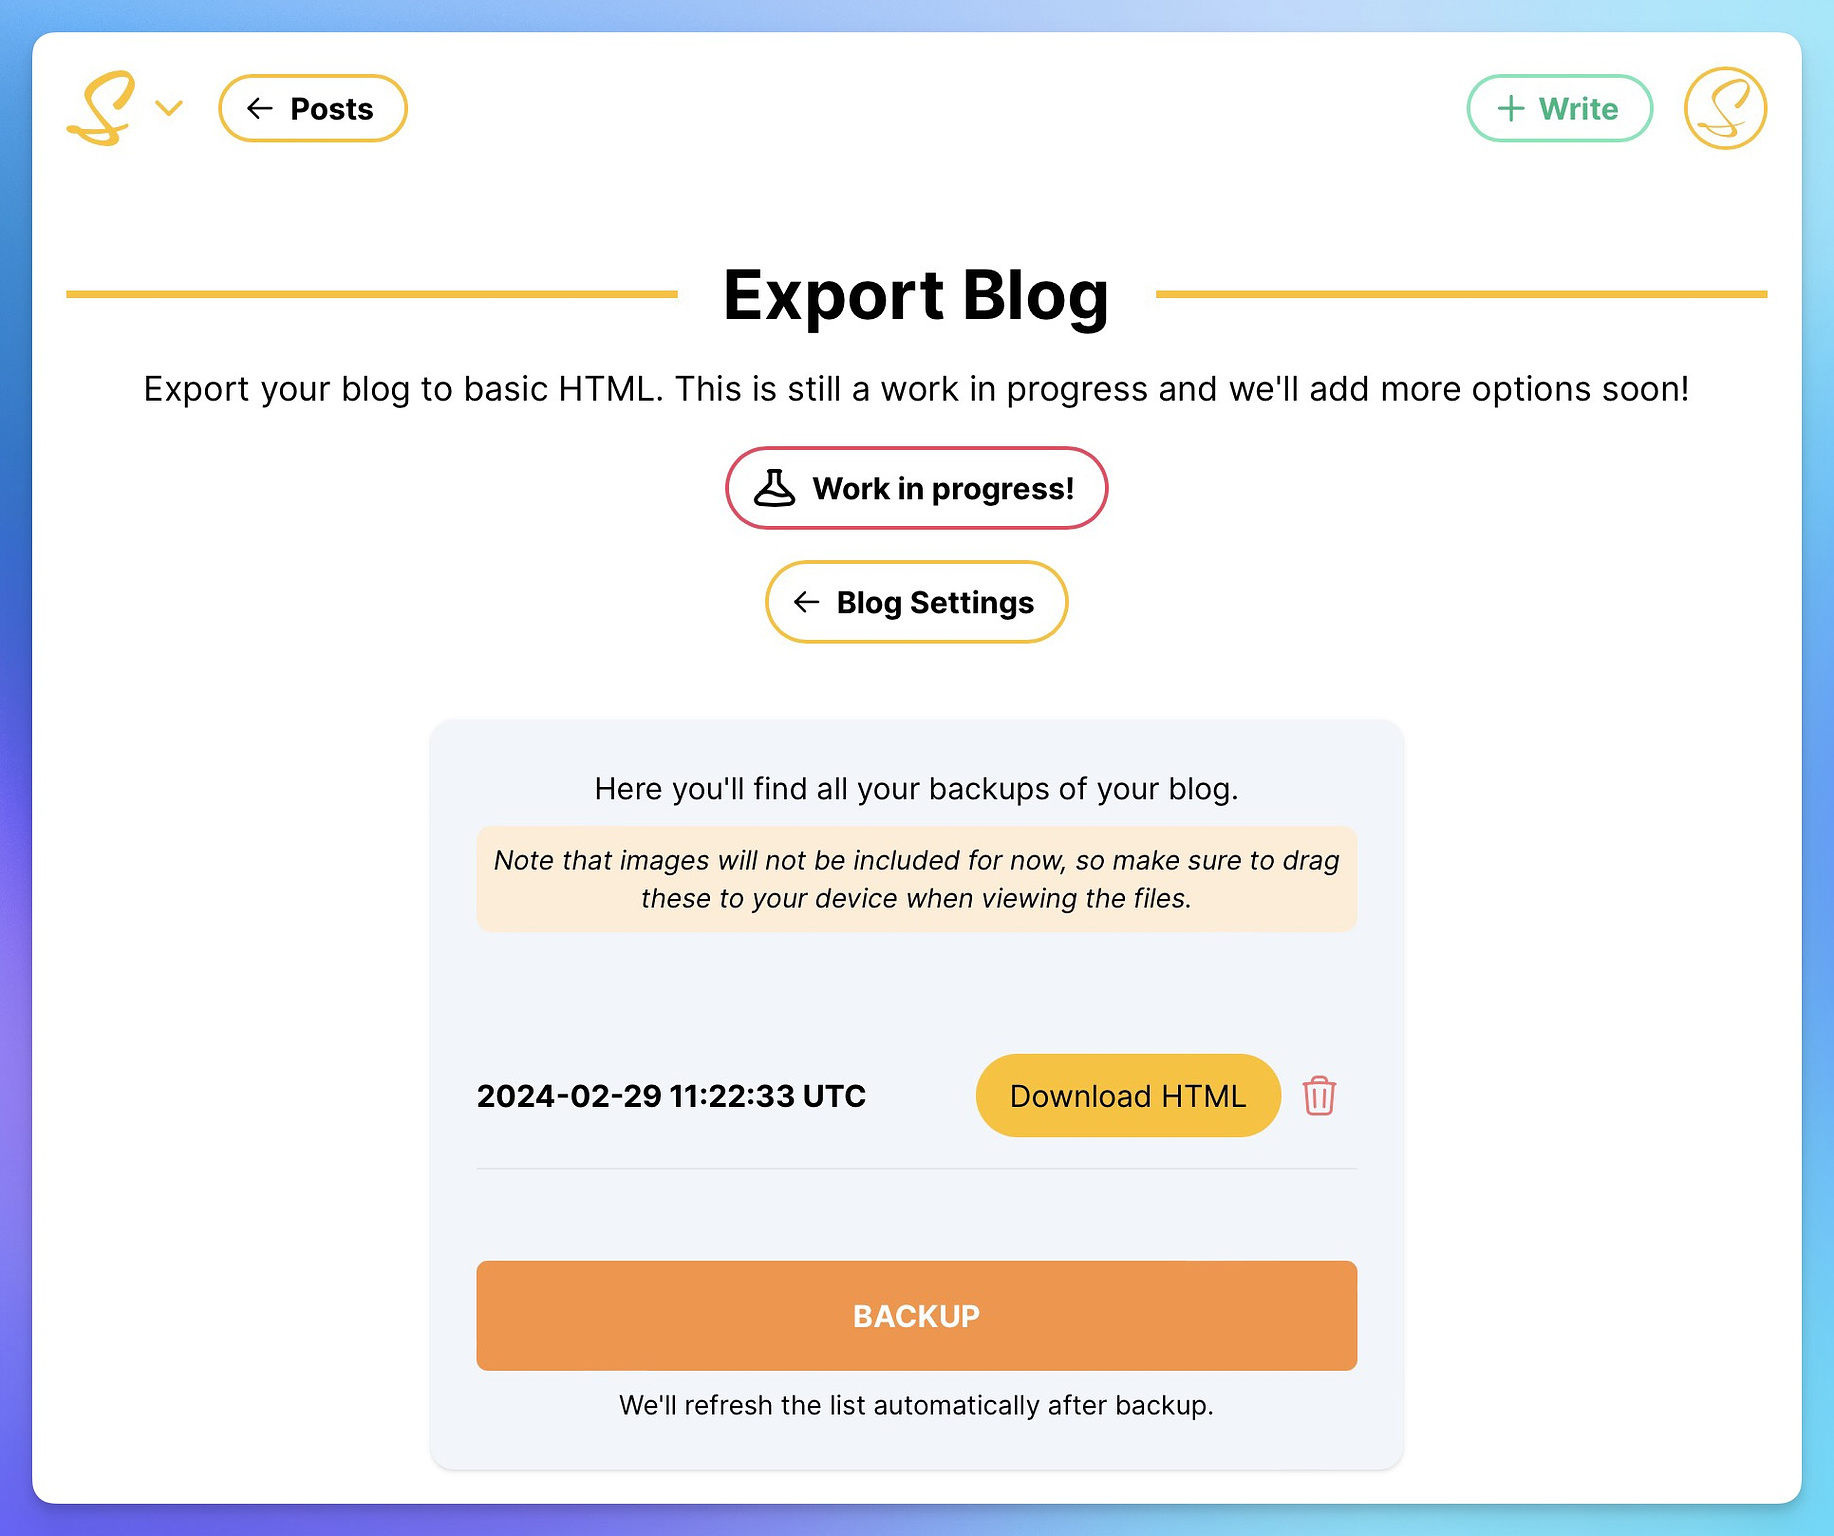 Export Blog Overview Page showing a list of your
latest backups.